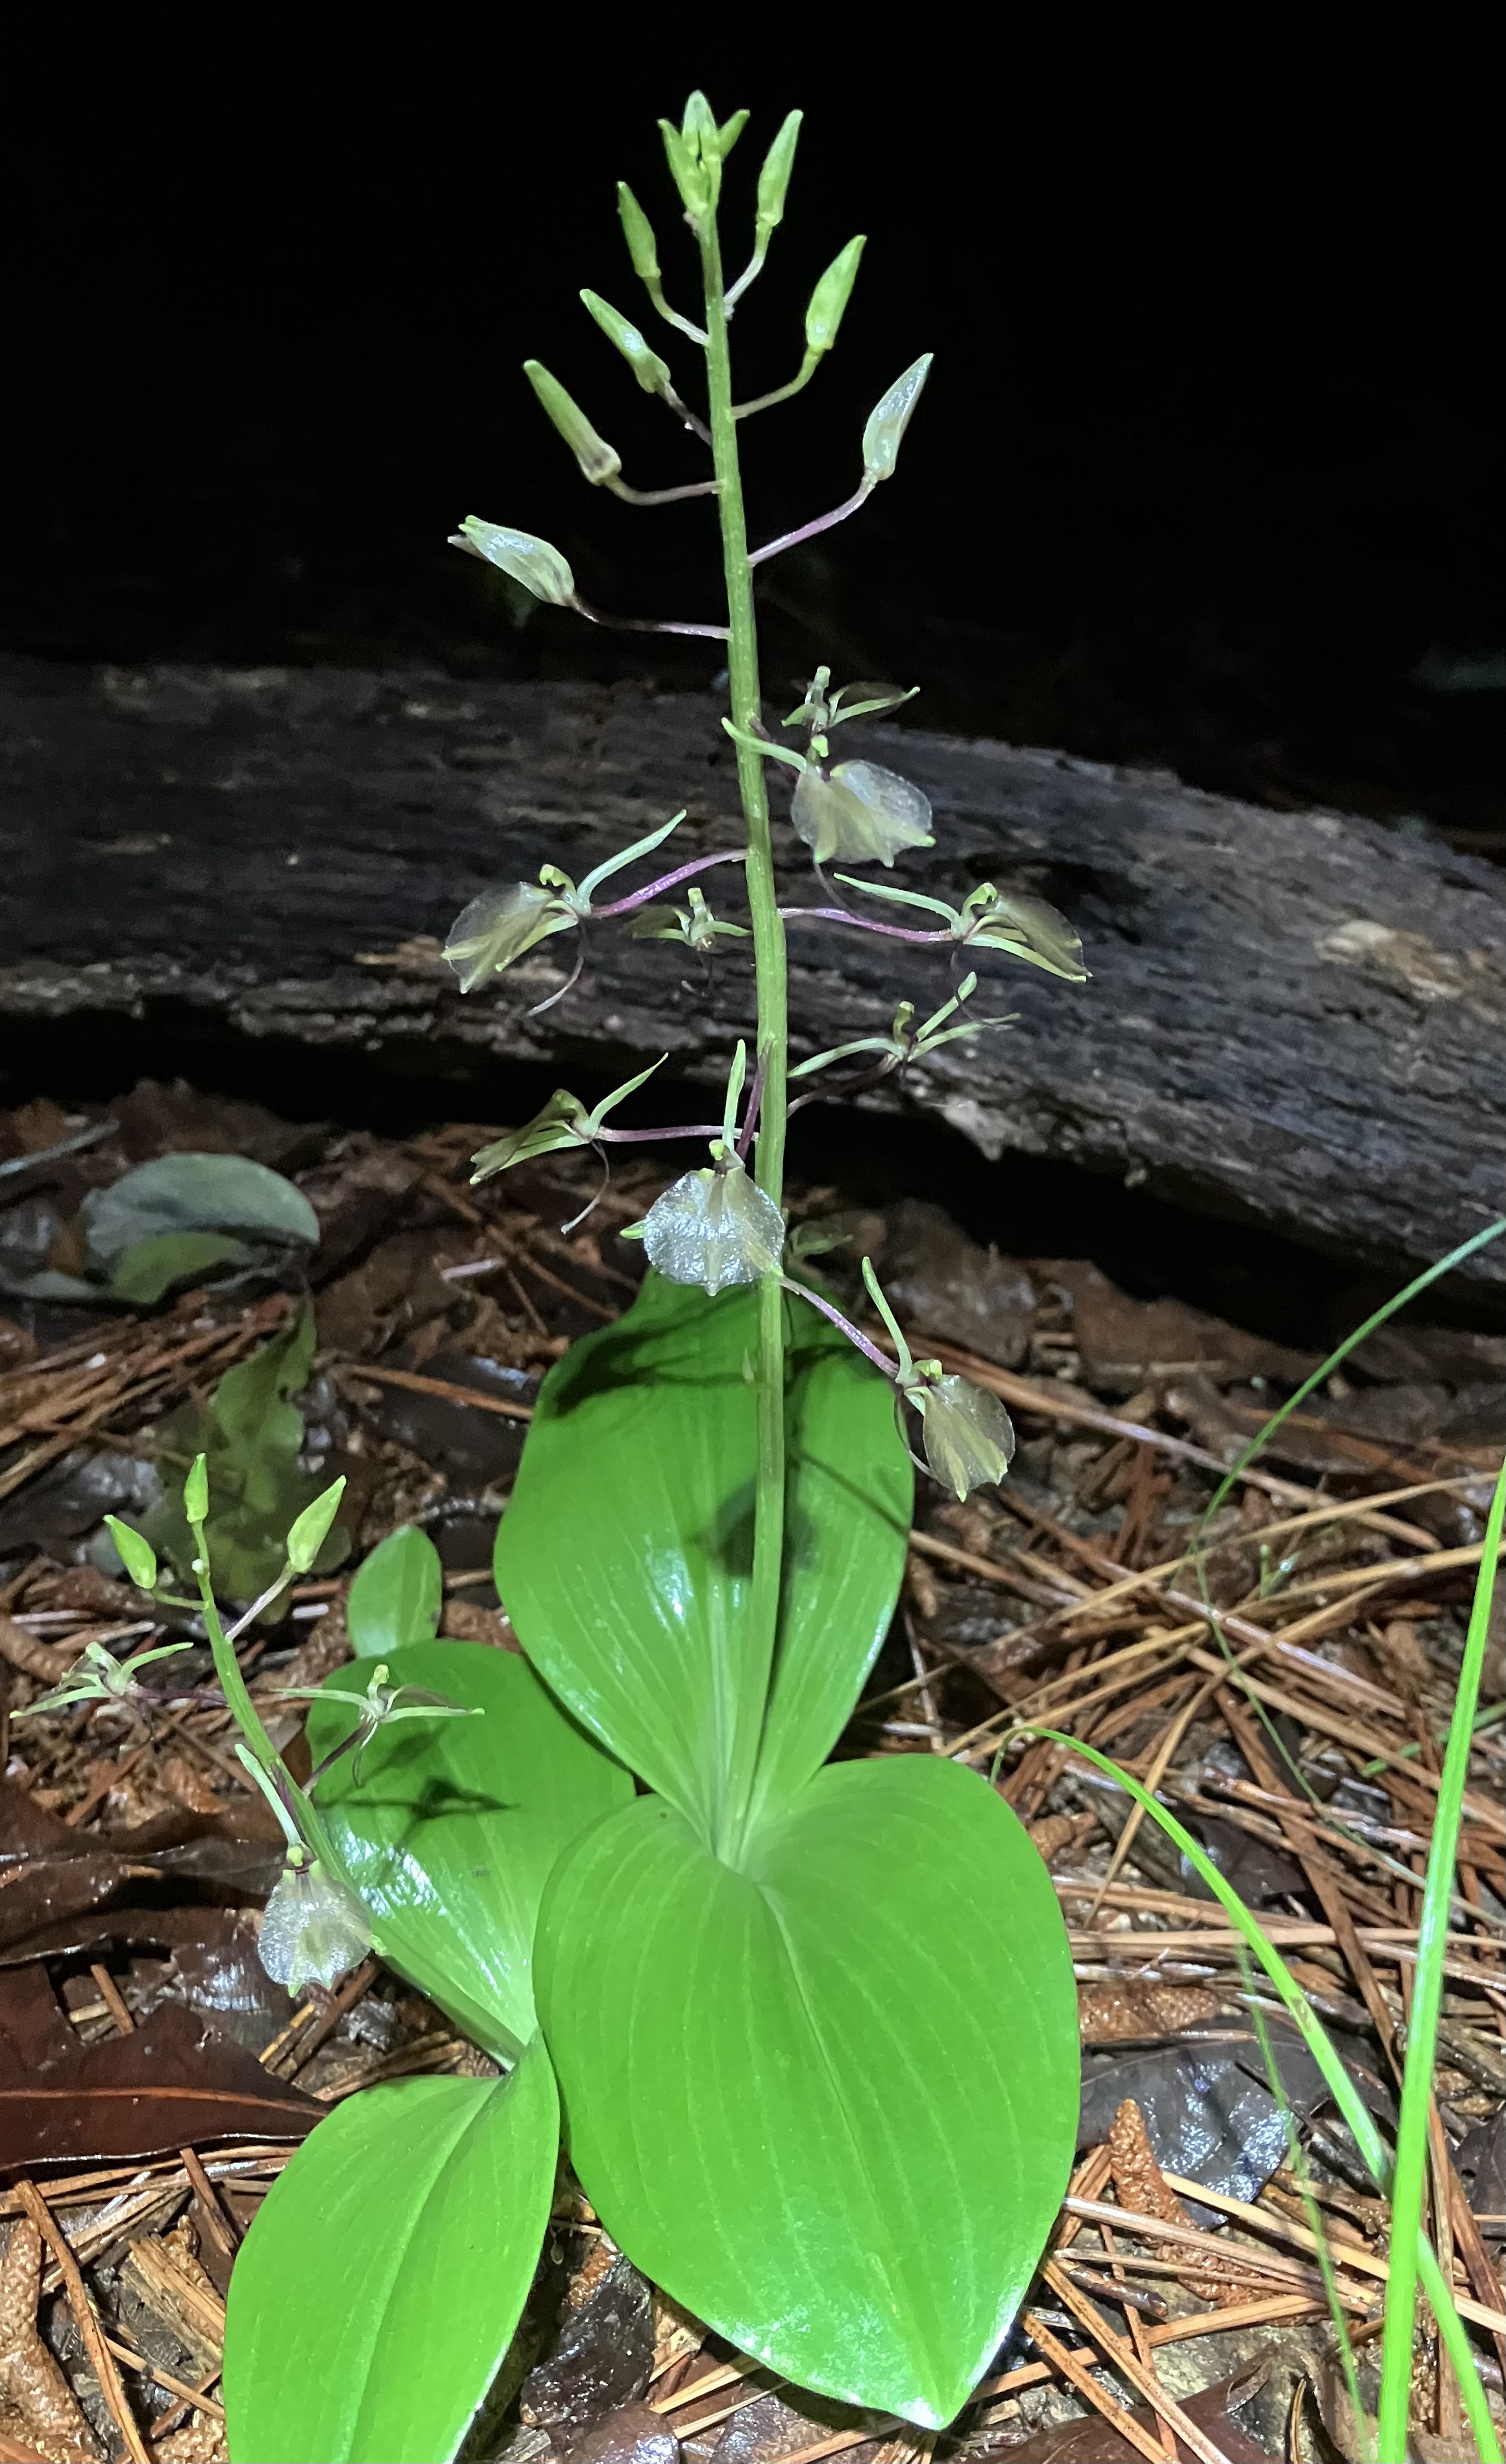 An orchid with broad leaves flat against the ground and small flowers